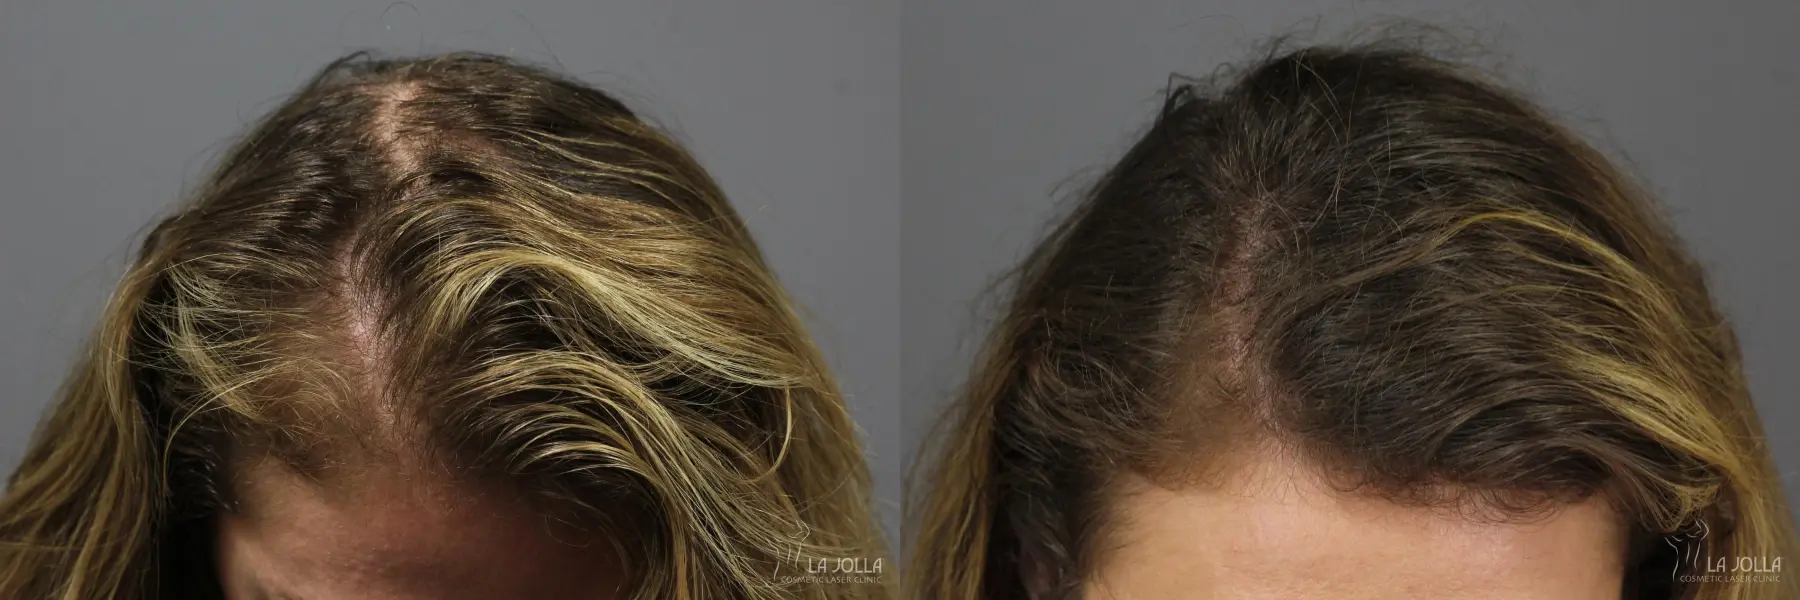 PRP (Platelet-Rich Plasma): Patient 3 - Before and After  